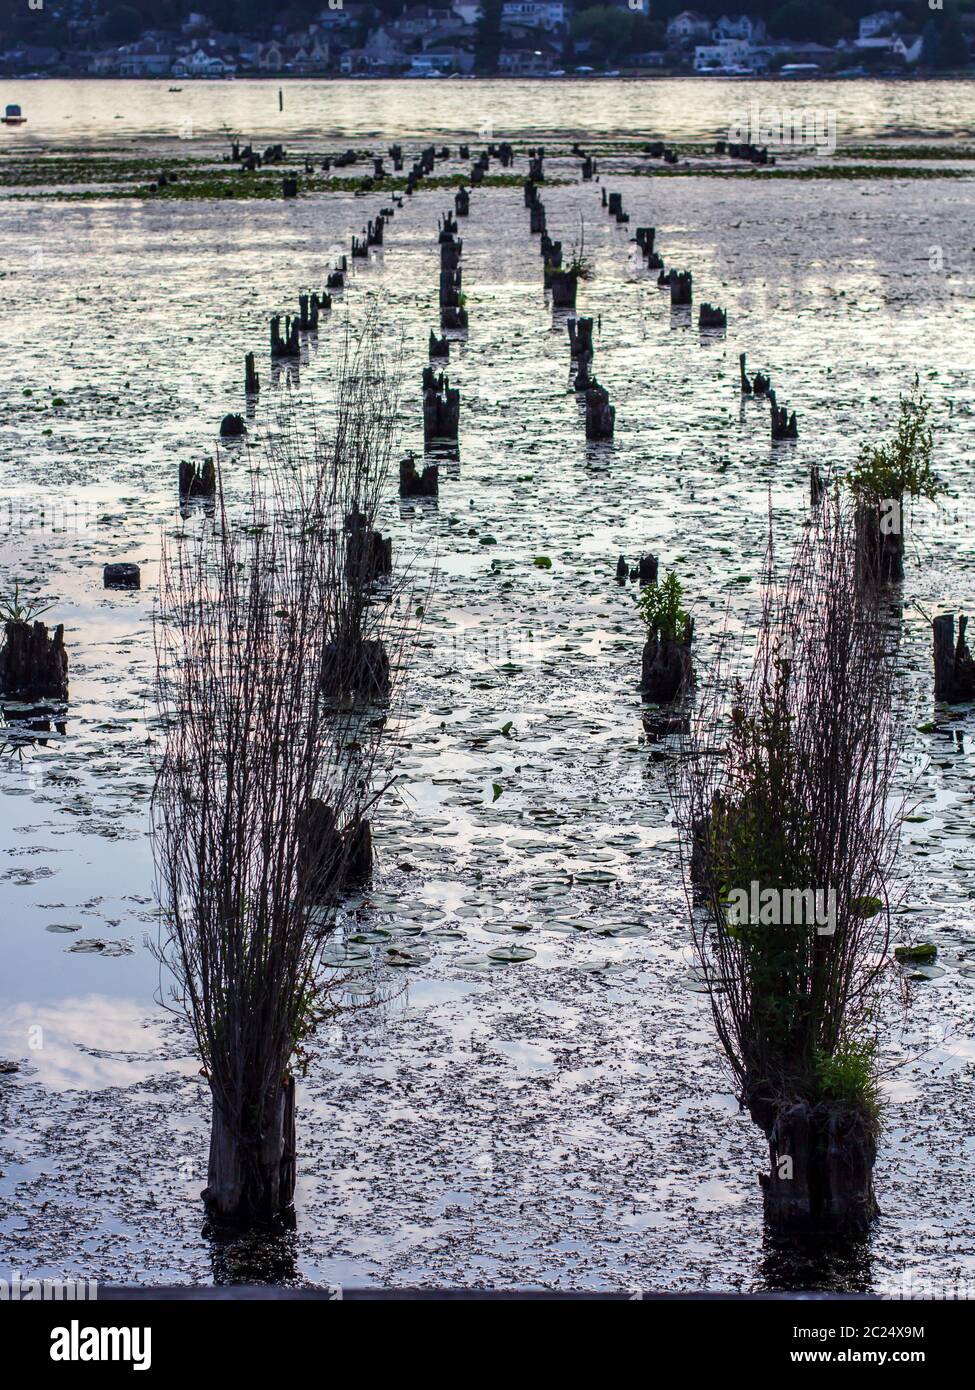 Old wood pilings in the water surrounded by plants Stock Photo